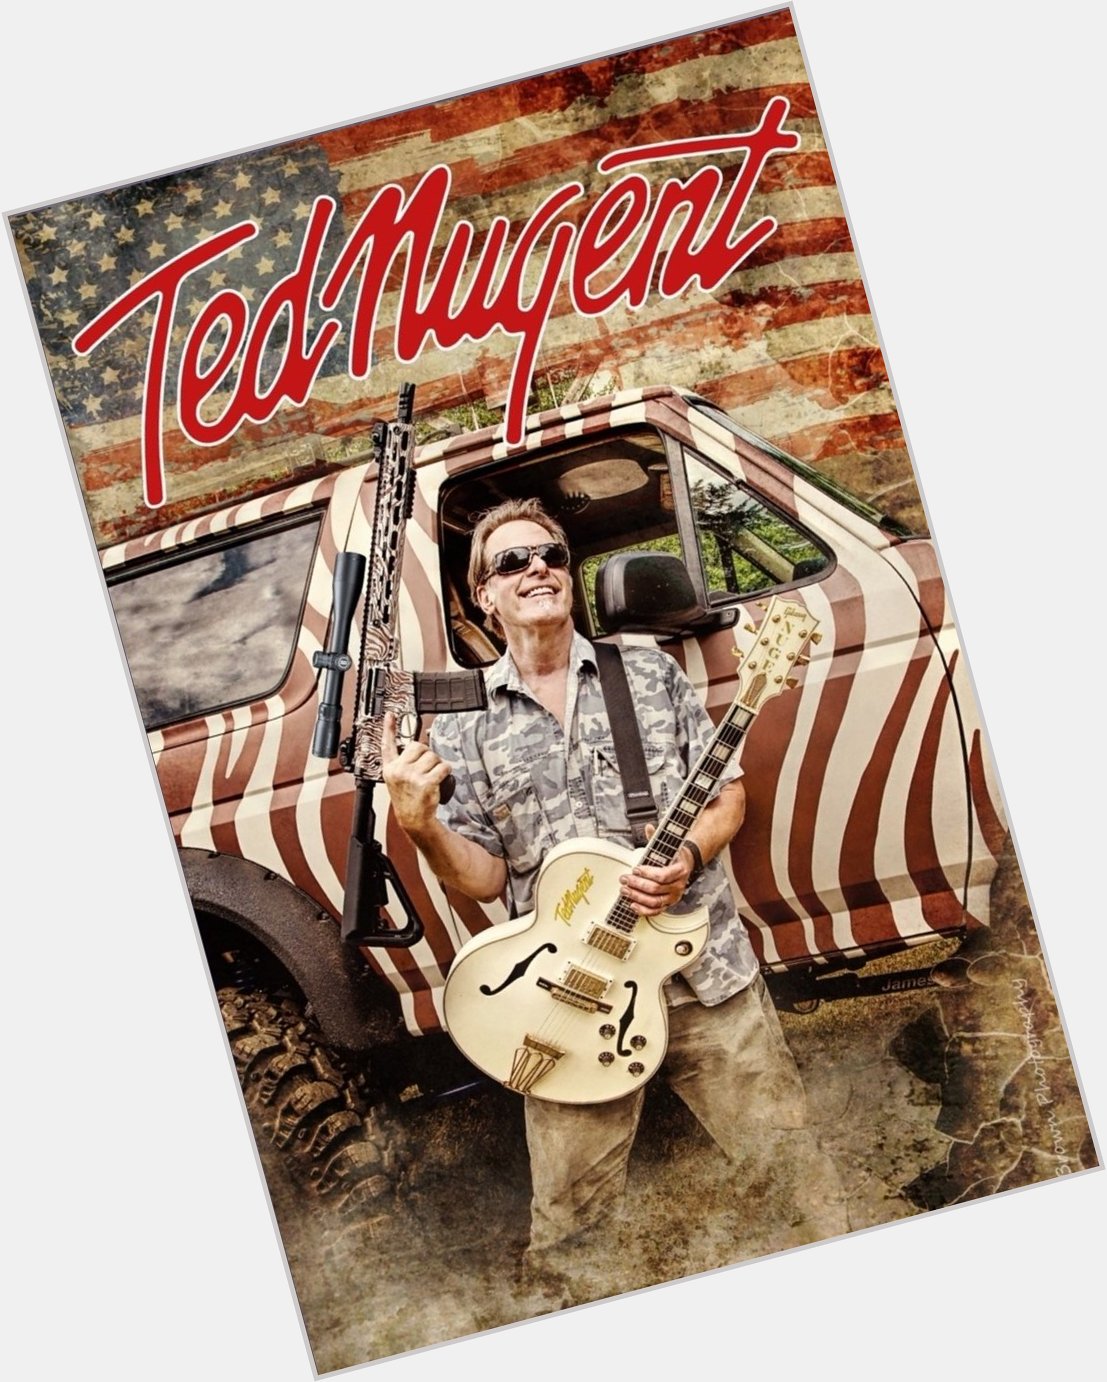 HAPPY GONZO BIRTHDAY TO TED NUGENT! 